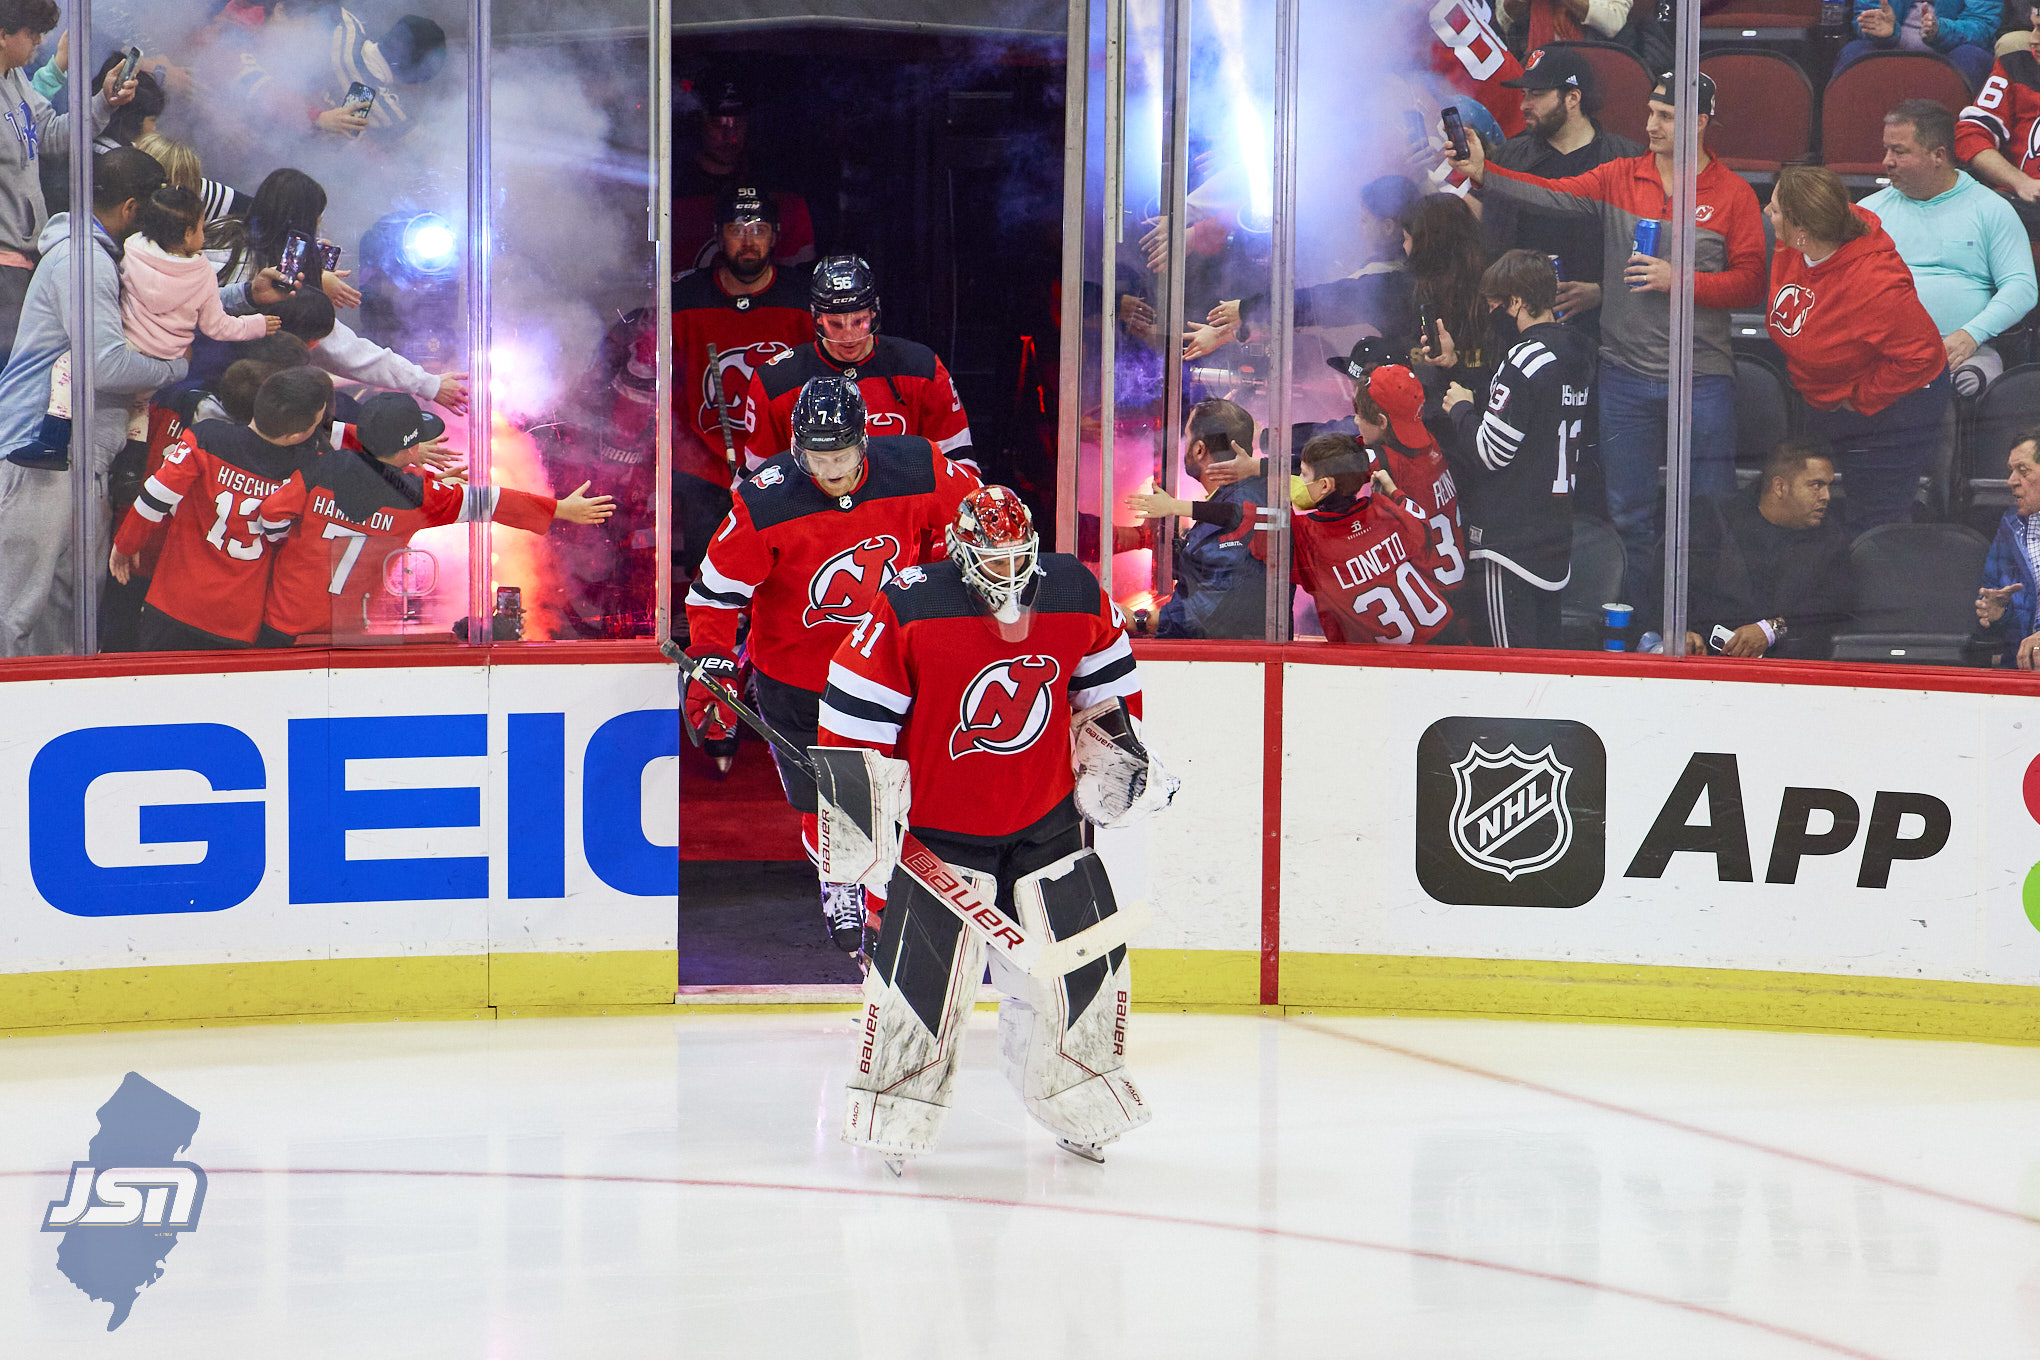 New Jersey Devils In Extension Talks With Star Forward - NHL Trade